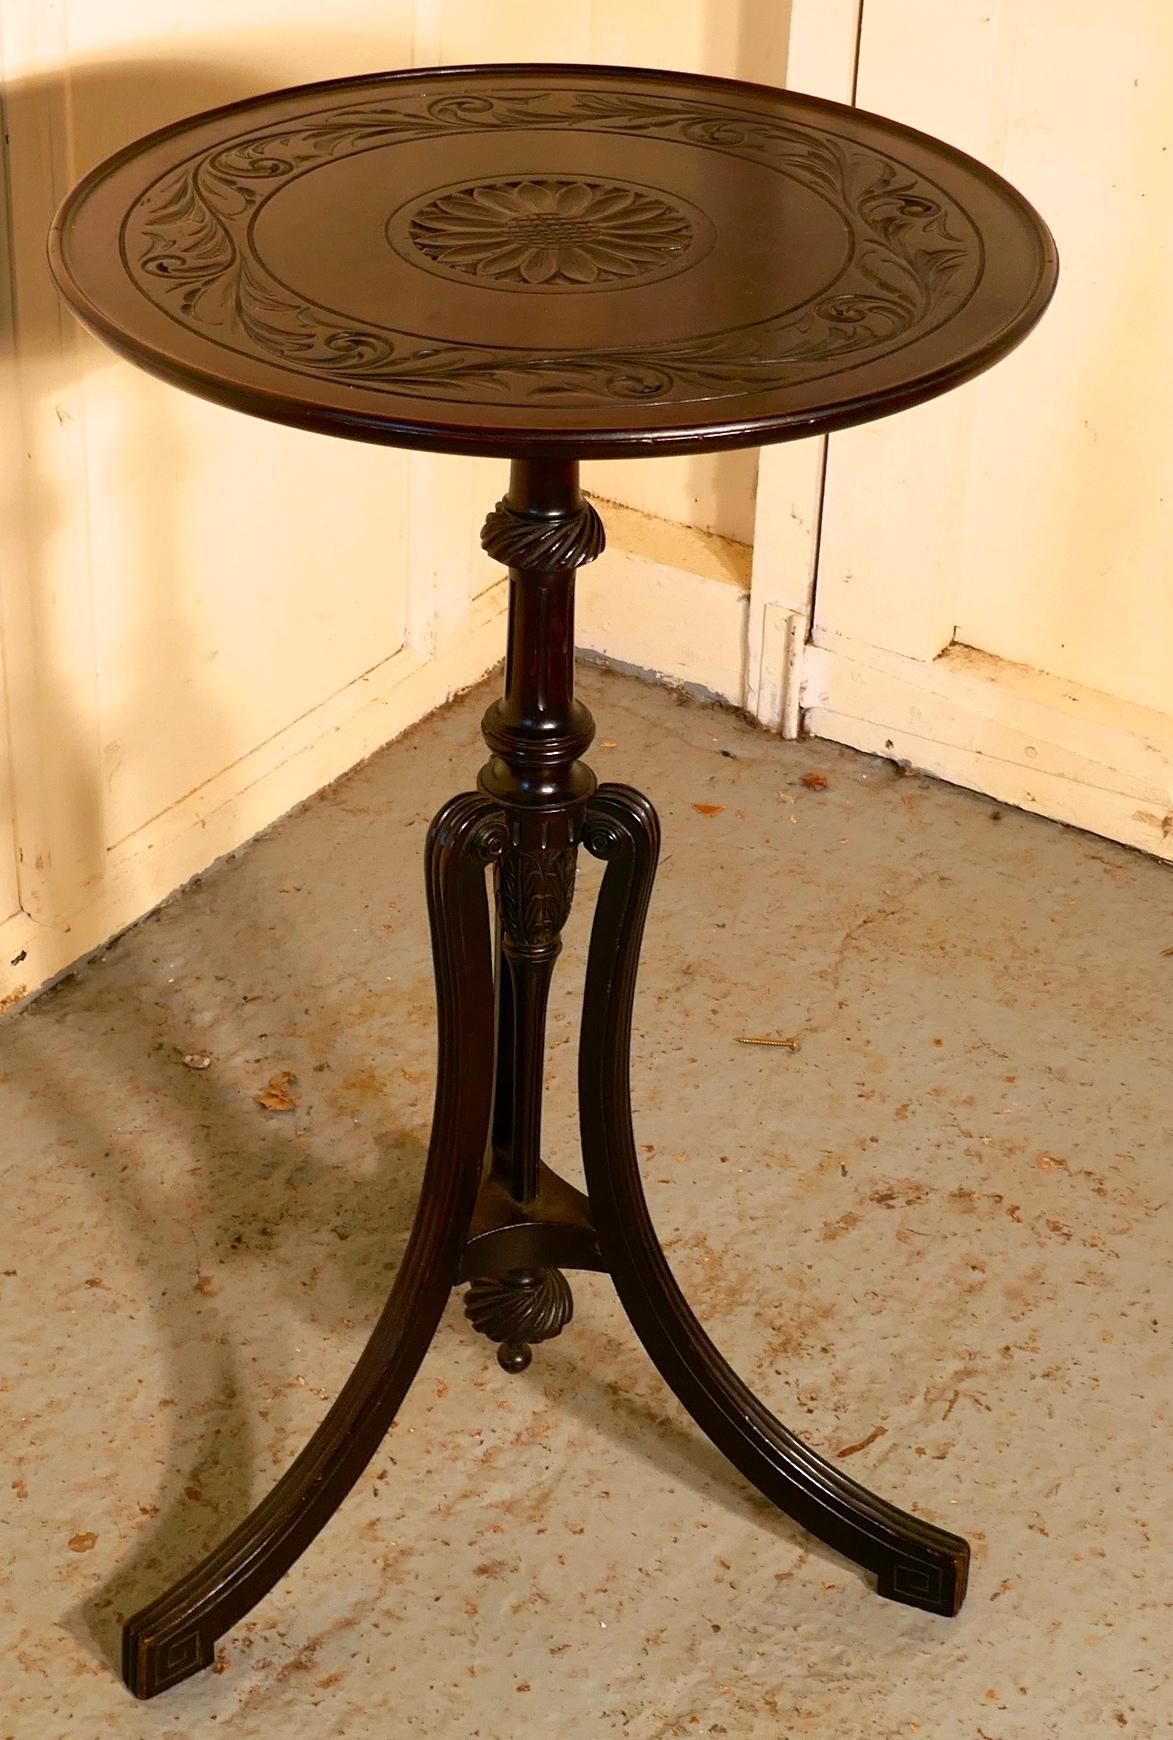 Decorative 2 tone Art Nouveau Wine Table by Bulstrode of Cambridge In Good Condition For Sale In Chillerton, Isle of Wight